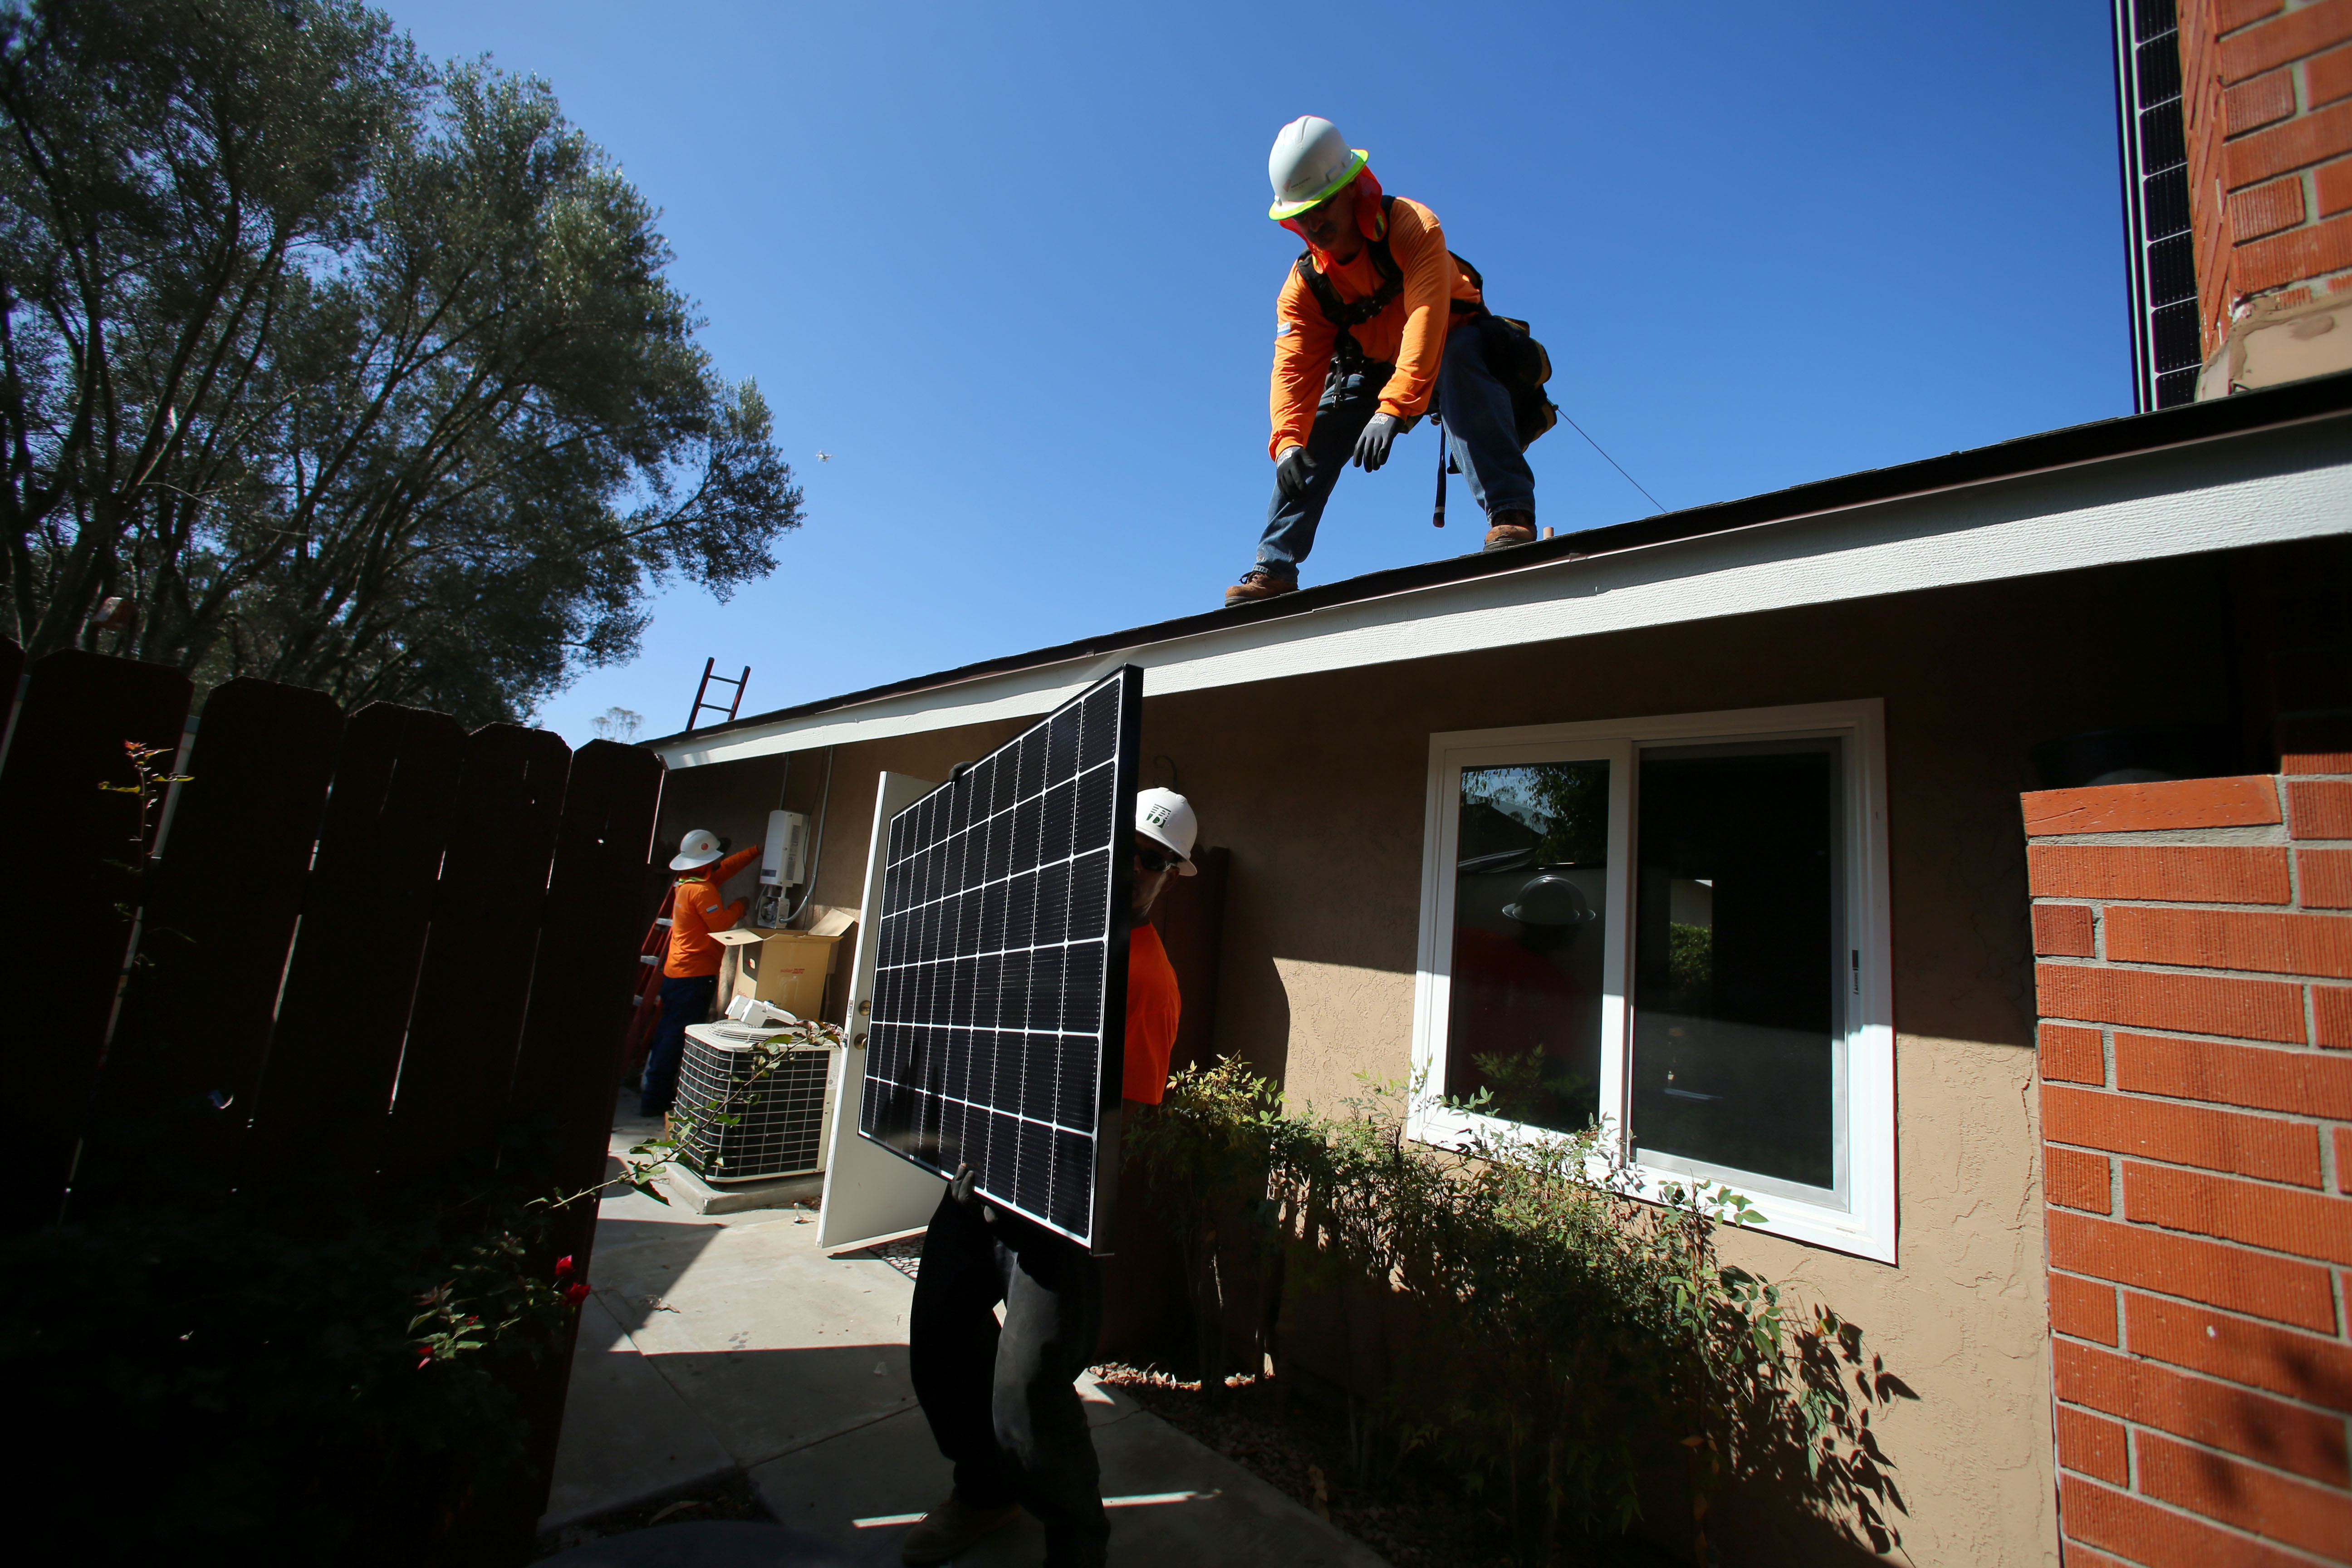 A man leans down off a roof to grab a solar panel being handed to him.